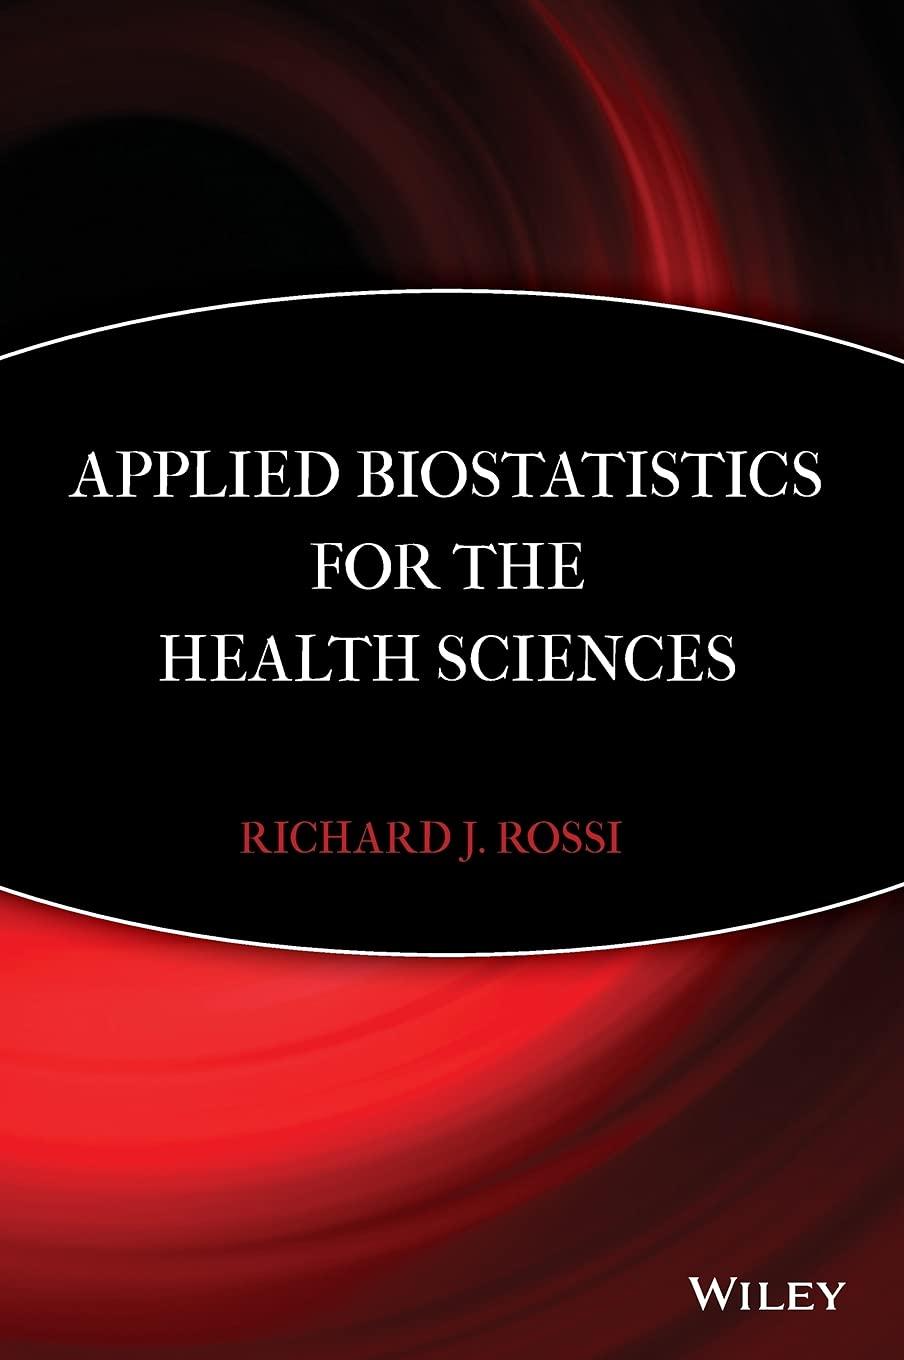 applied biostatistics for the health sciences 1st edition richard j. rossi 0470147644, 9780470147641